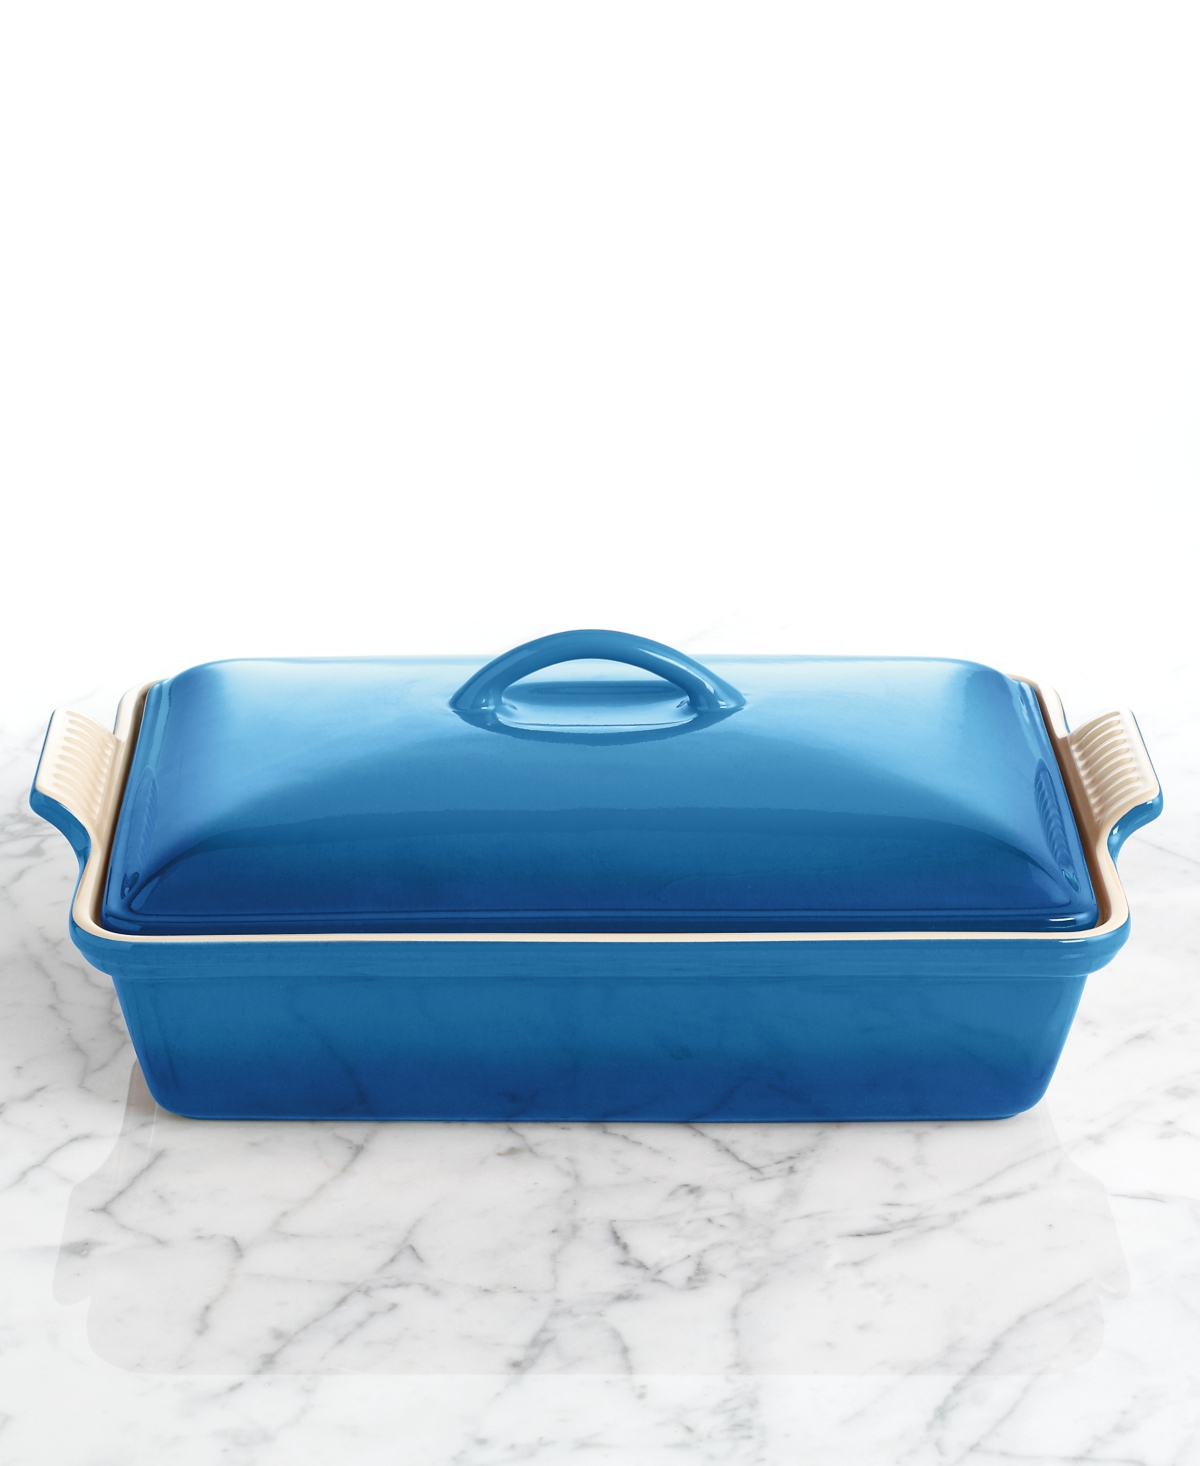 Le Creuset Heritage Stoneware 12" X 9" Covered Rectangular Baking Dish In Marseille